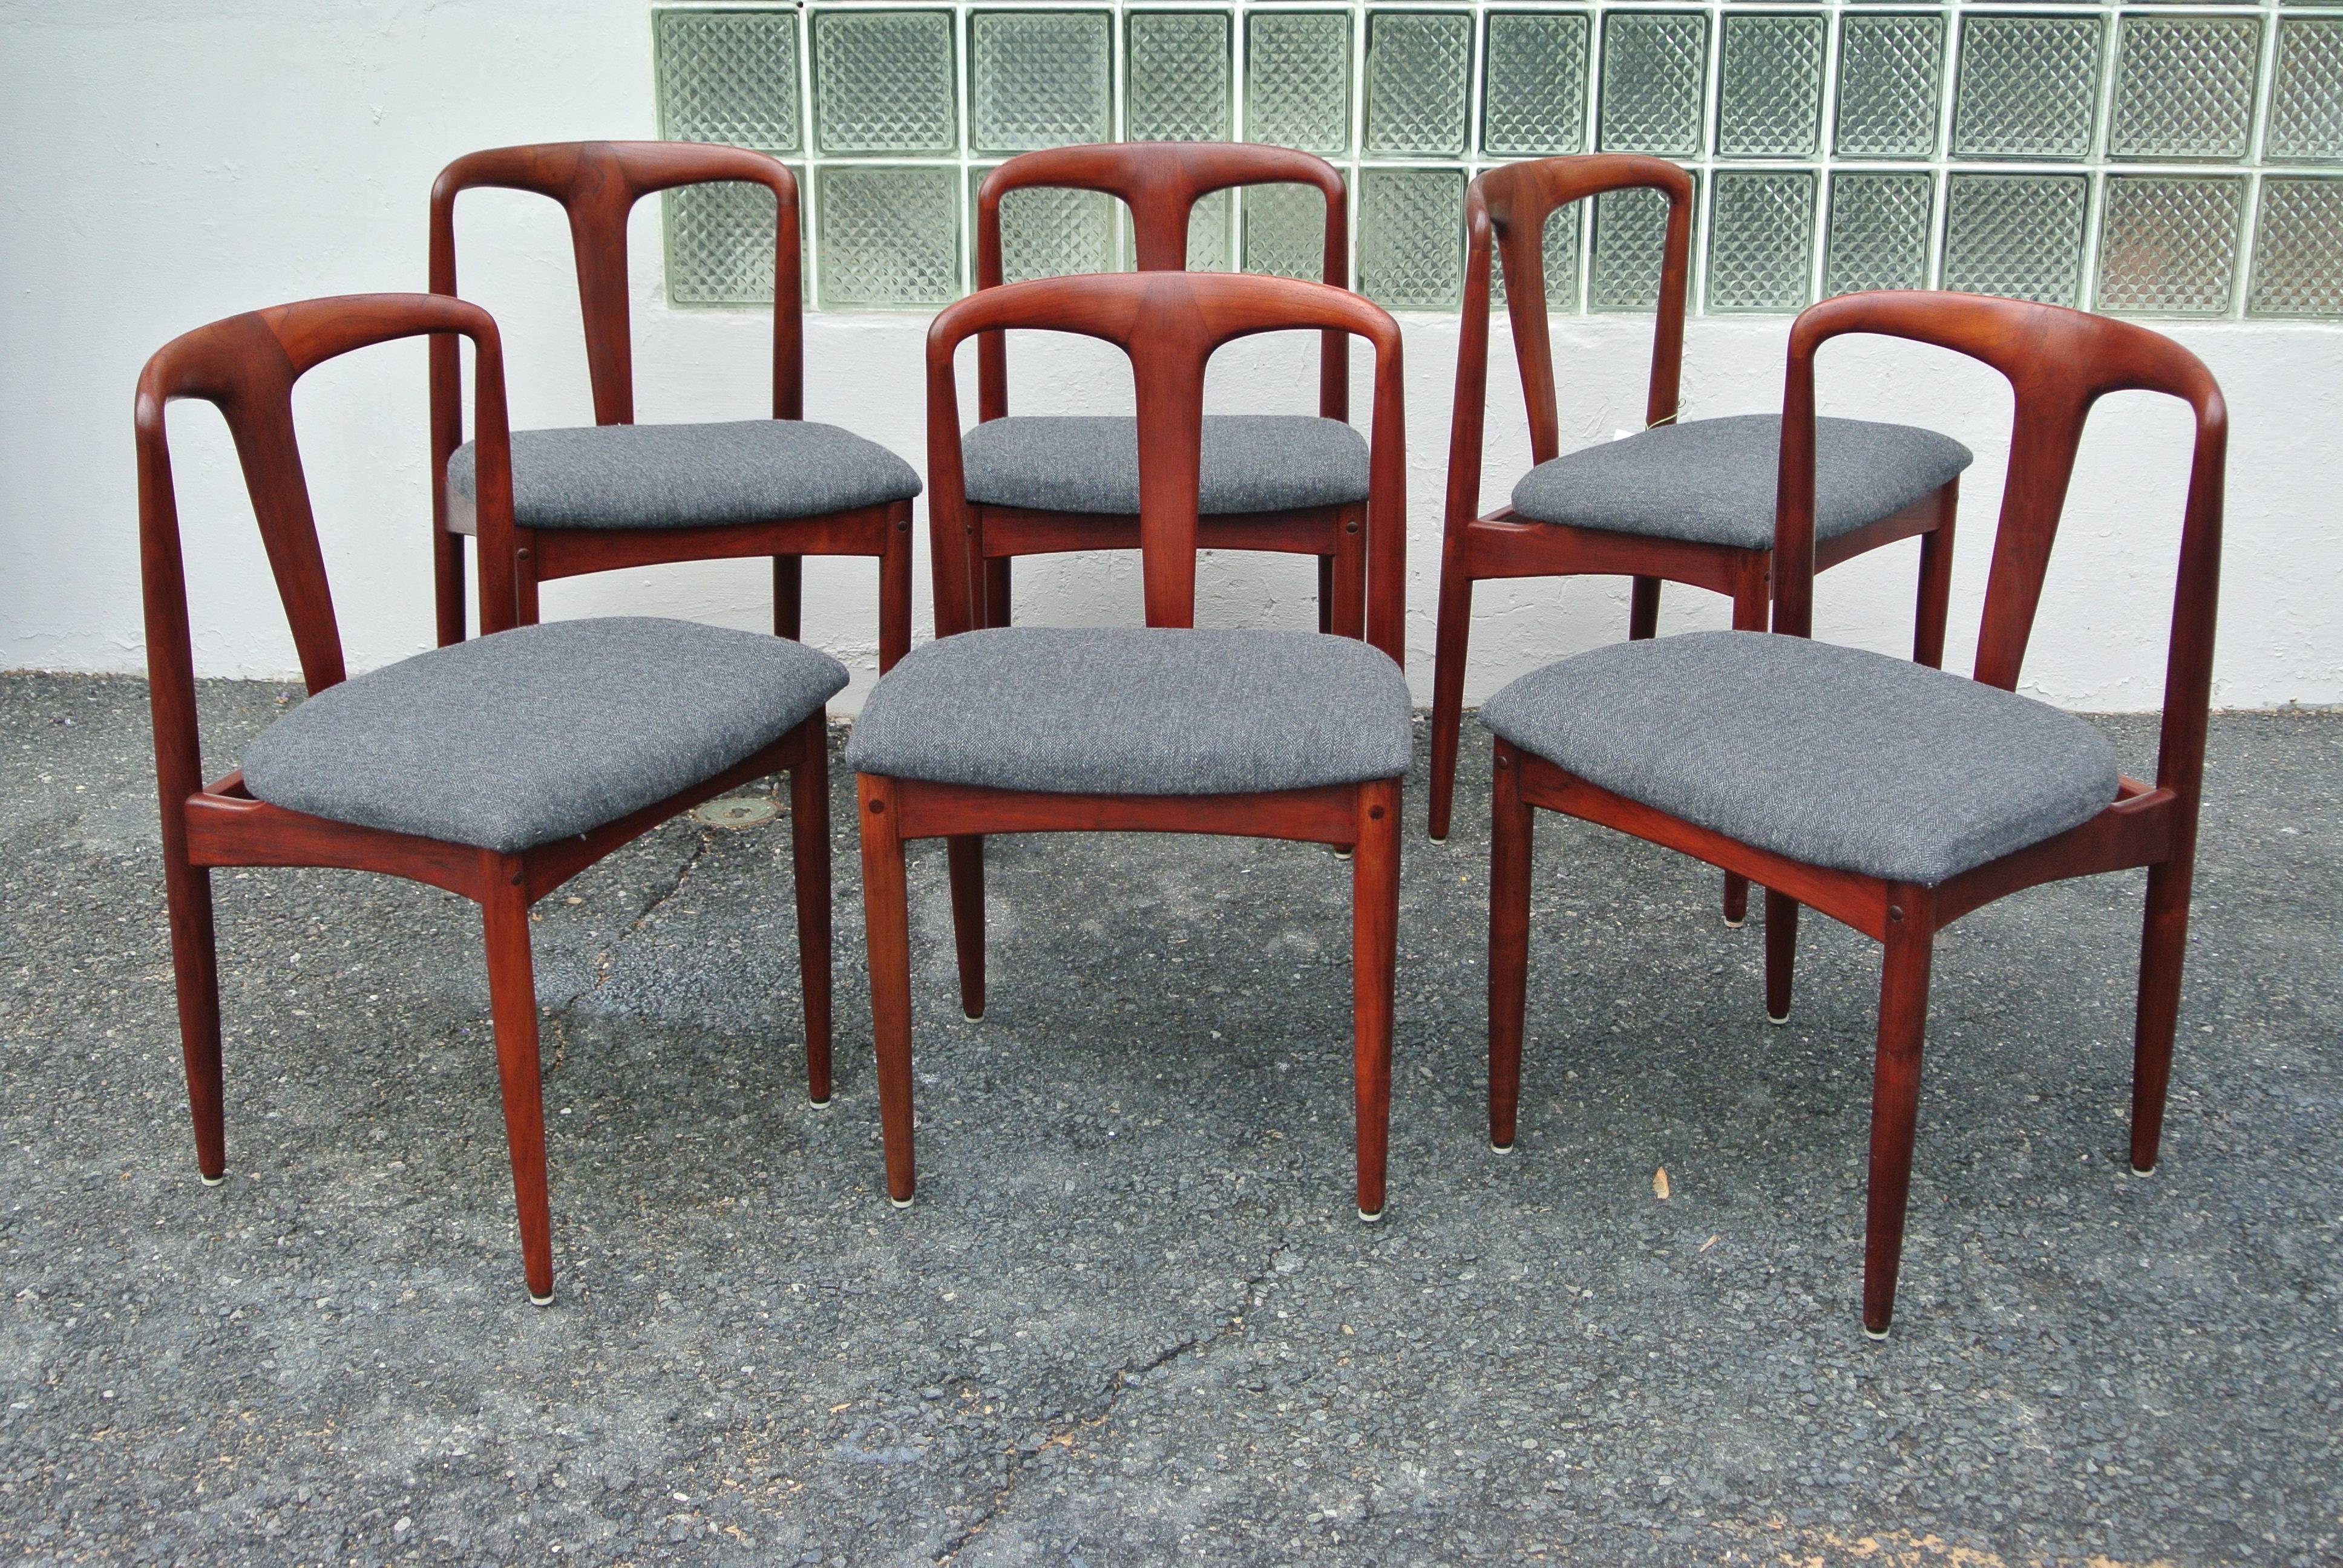 Beautiful vintage set of teak dining chairs by Johannes Andersen for Møbelfabrik. This set of six 